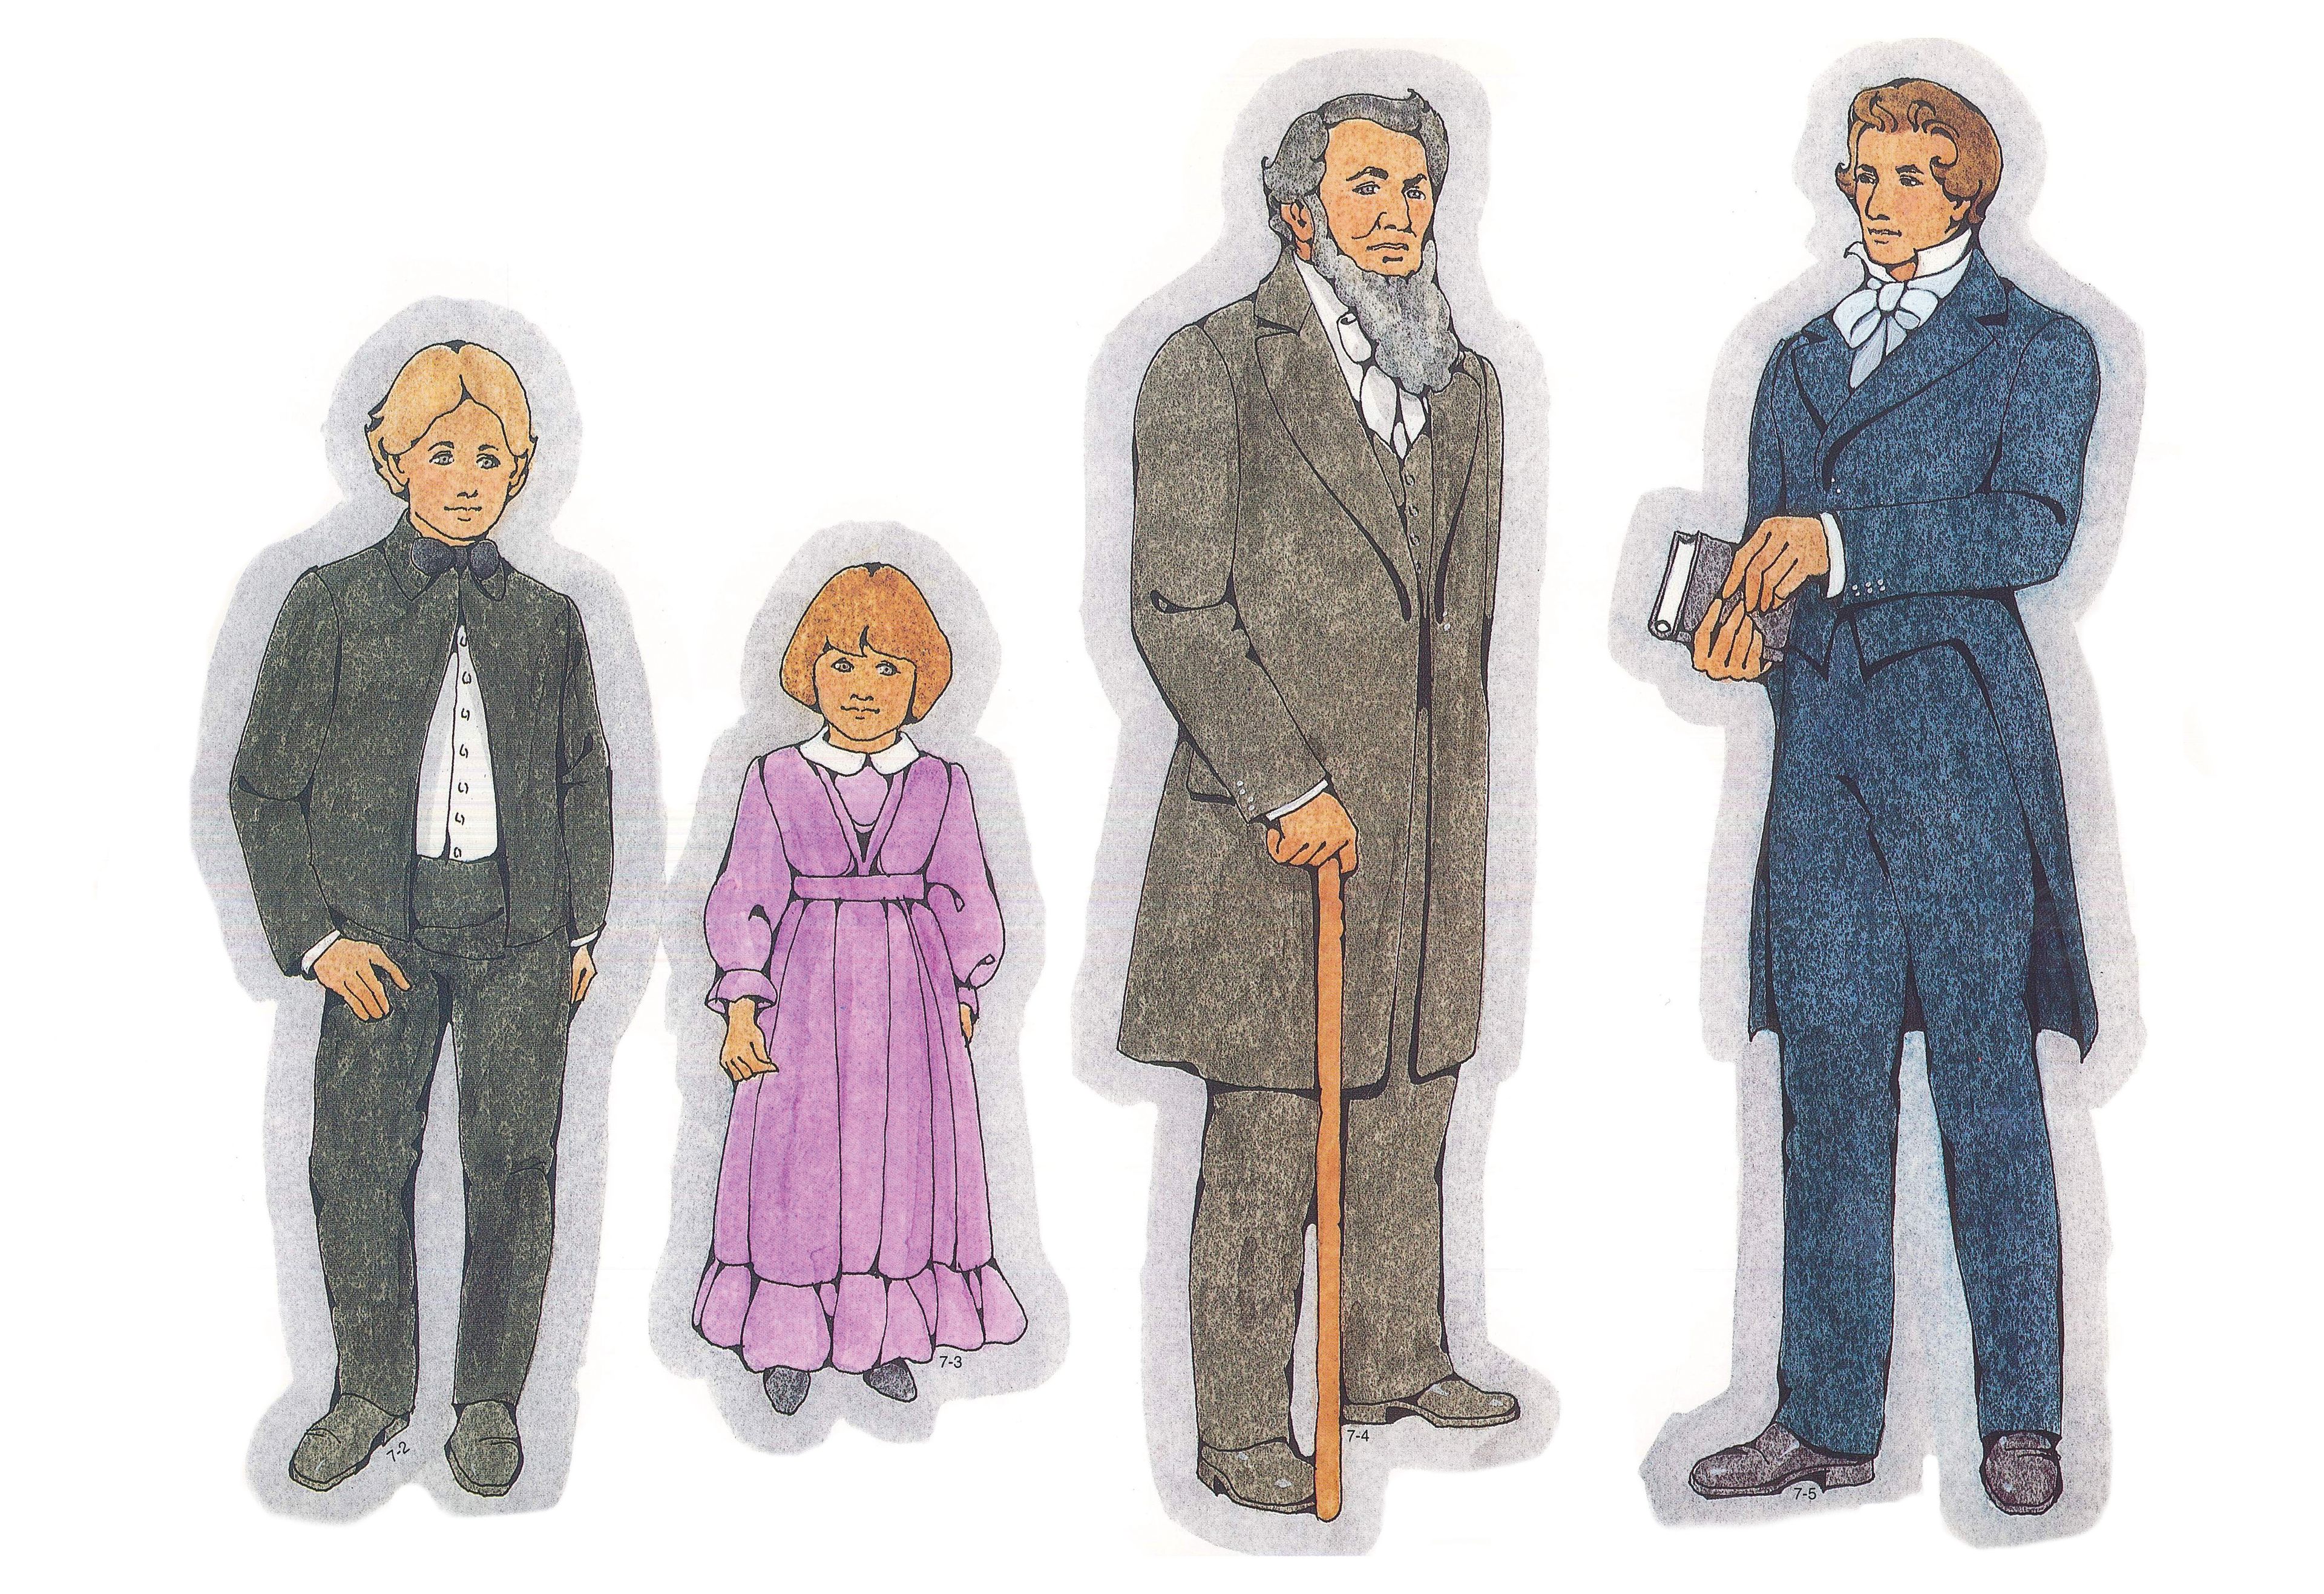 Primary Visual Aids: Cutouts 7-2, Young Pioneer Boy; 7-3, Young Pioneer Girl; 7-4, Brigham Young; 7-5, Joseph Smith.